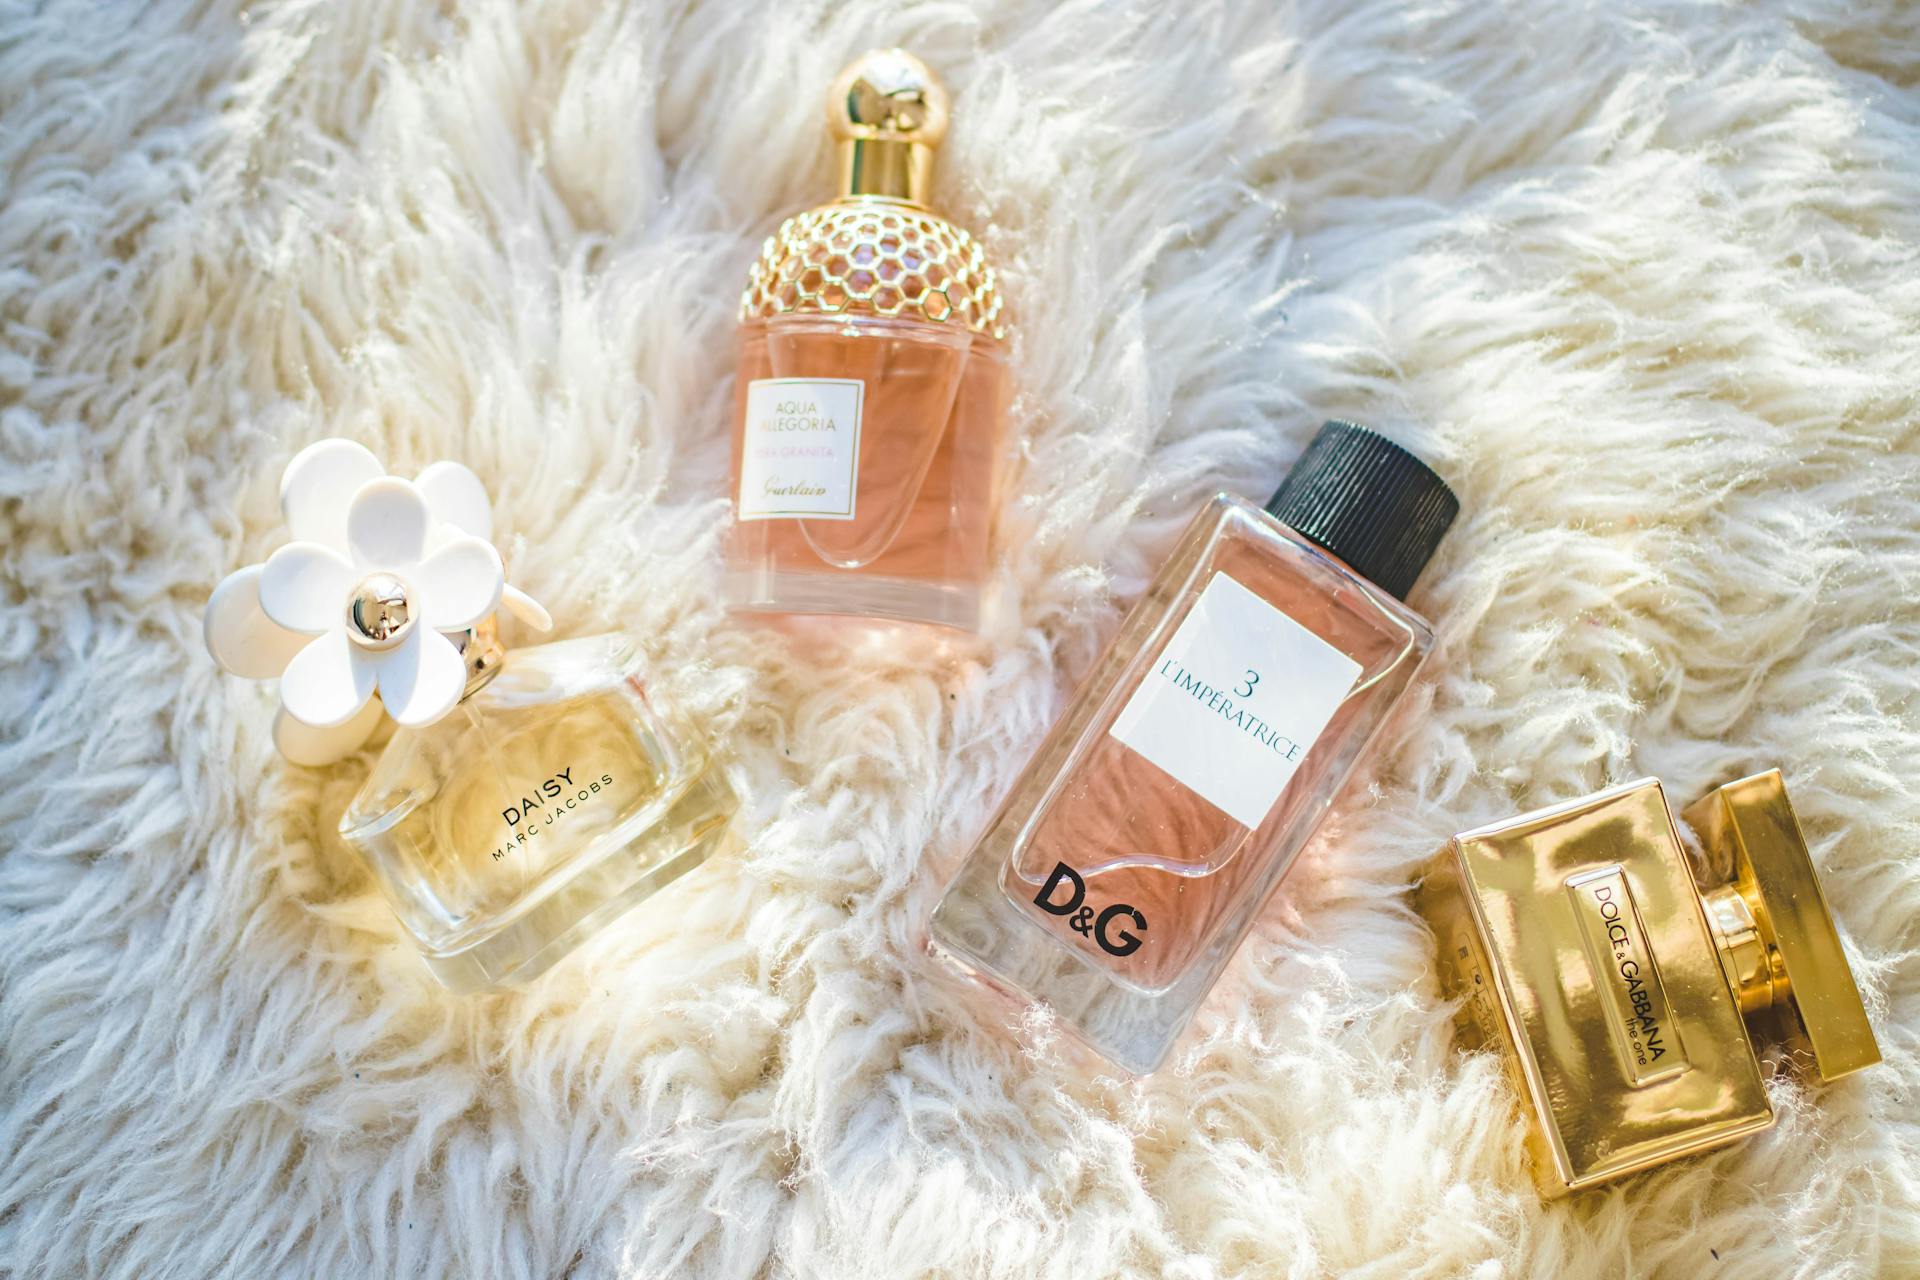 Is The Scent Of Fragrance Revival Actually The Same? : Fragrance ...